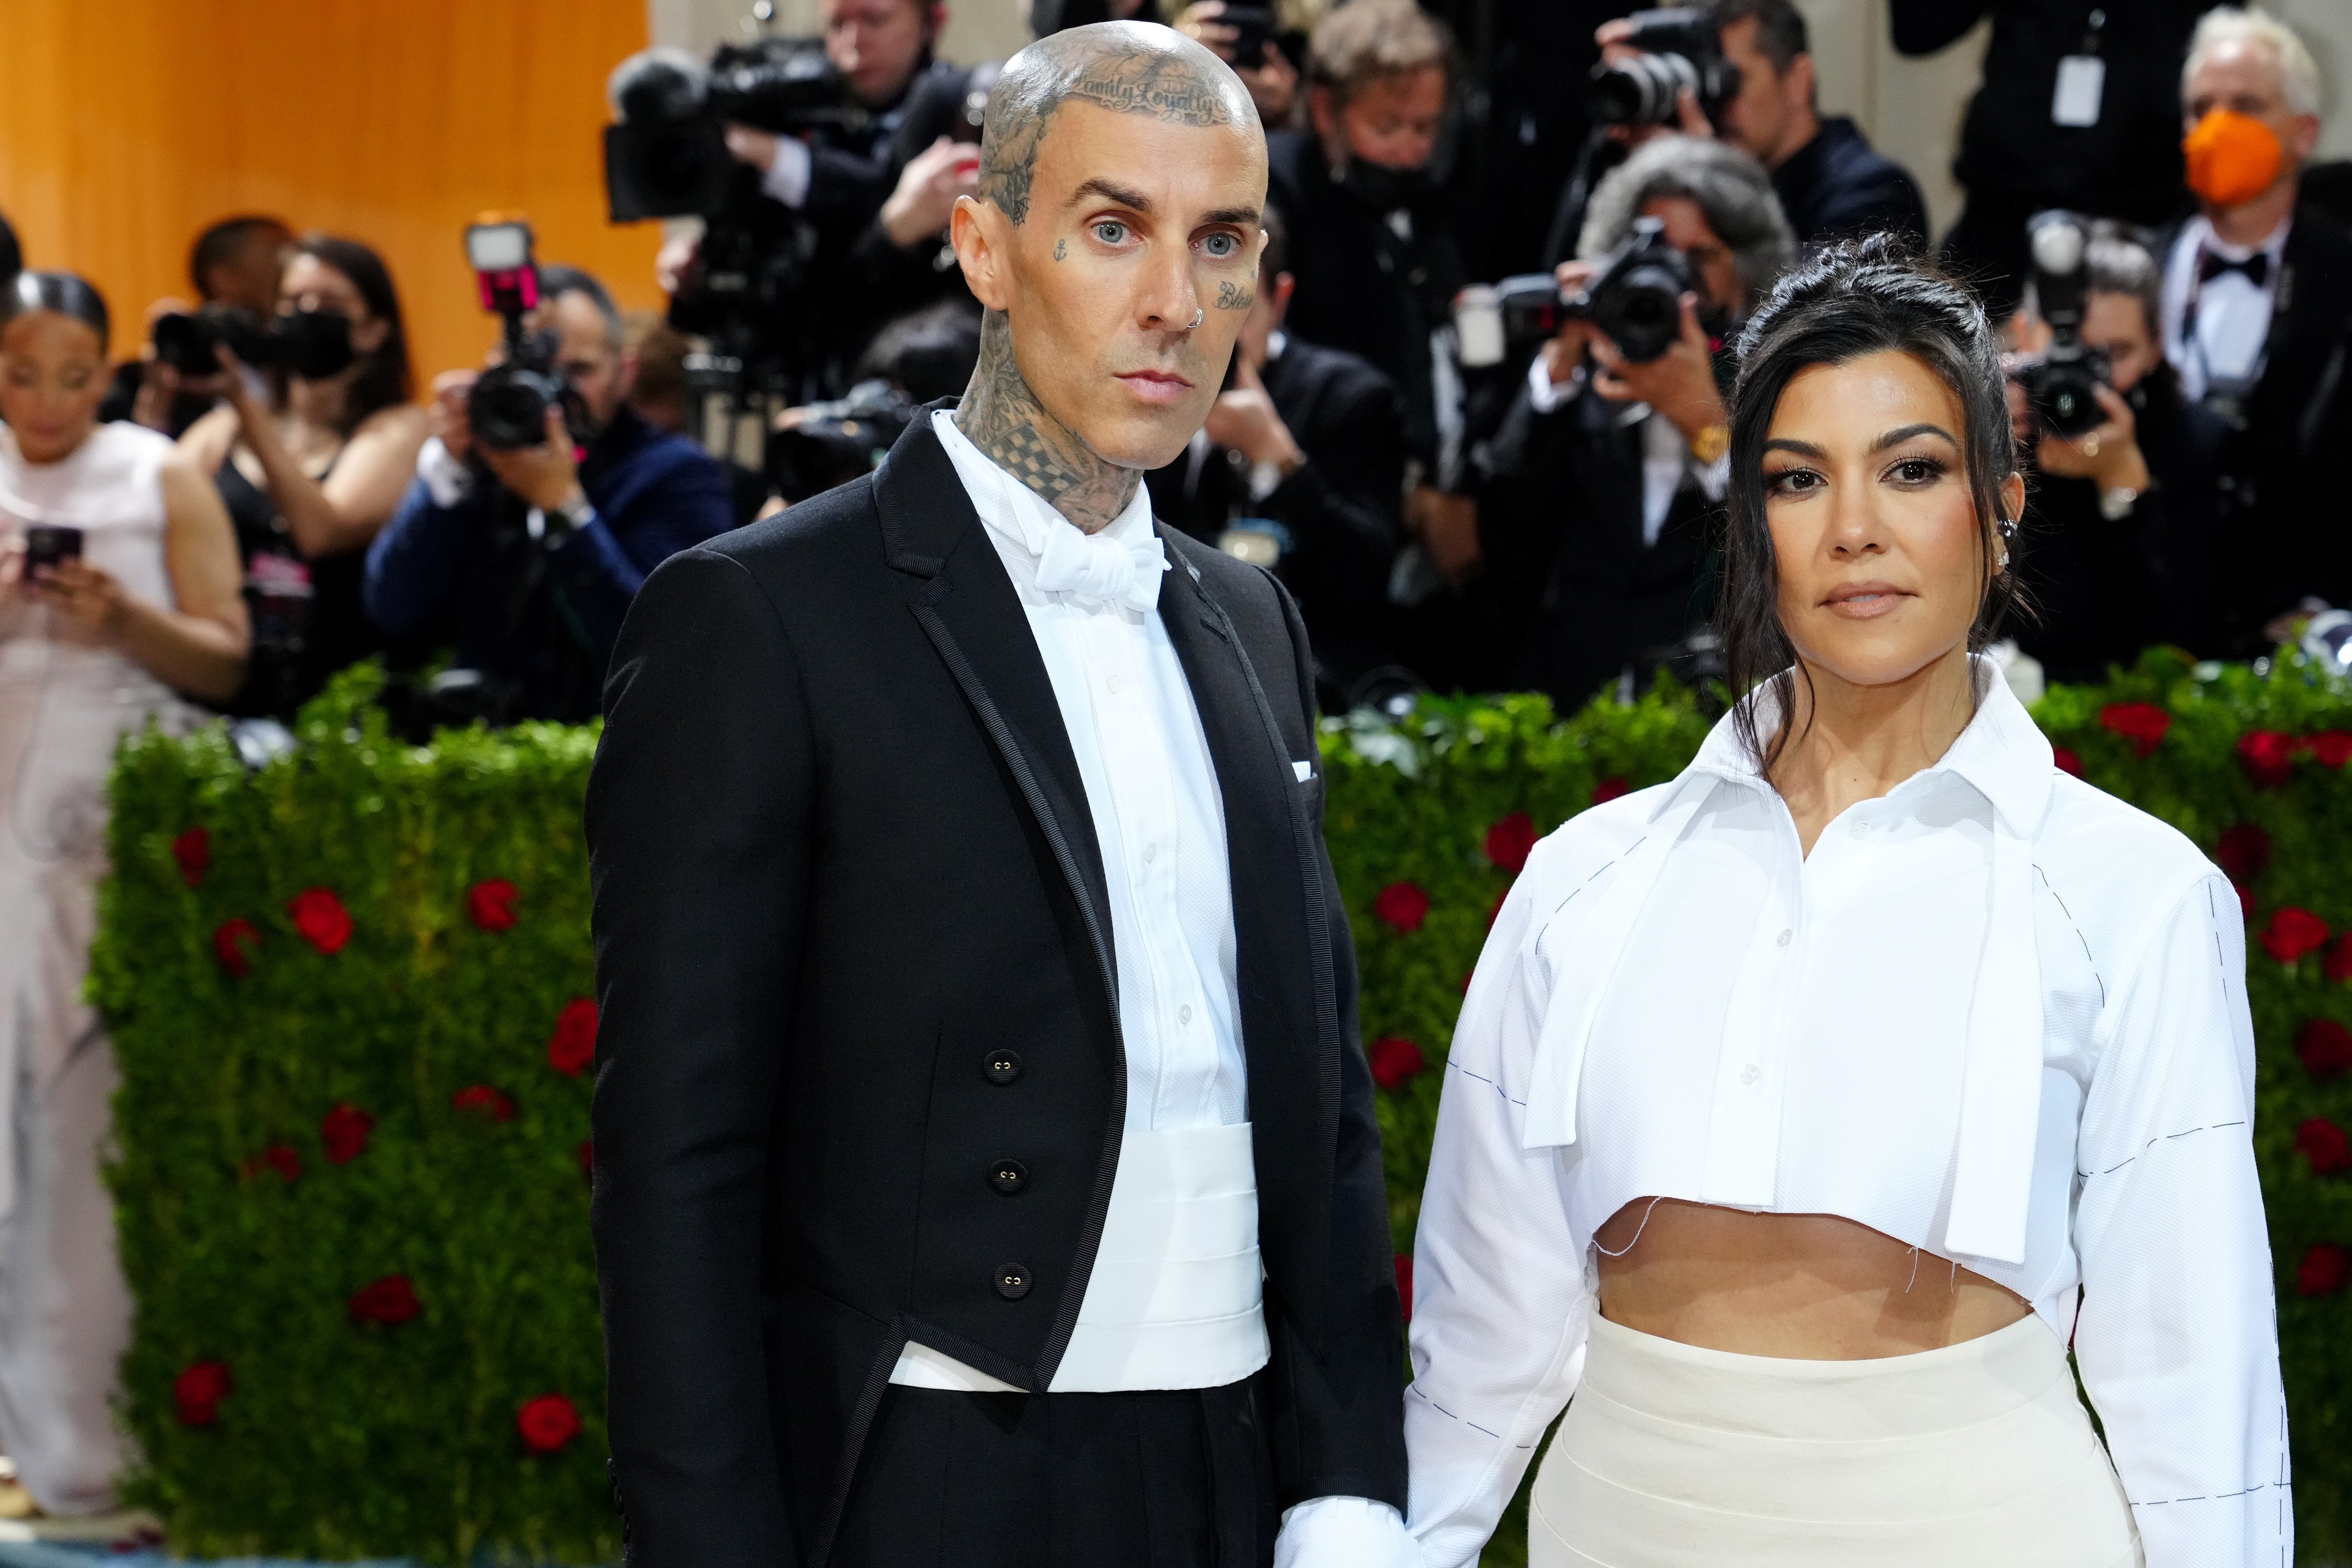 Travis Barker and Kourtney Kardashian attend The 2022 Met Gala Celebrating "In America: An Anthology of Fashion" on May 02, 2022 in New York City. | Source: Getty Images